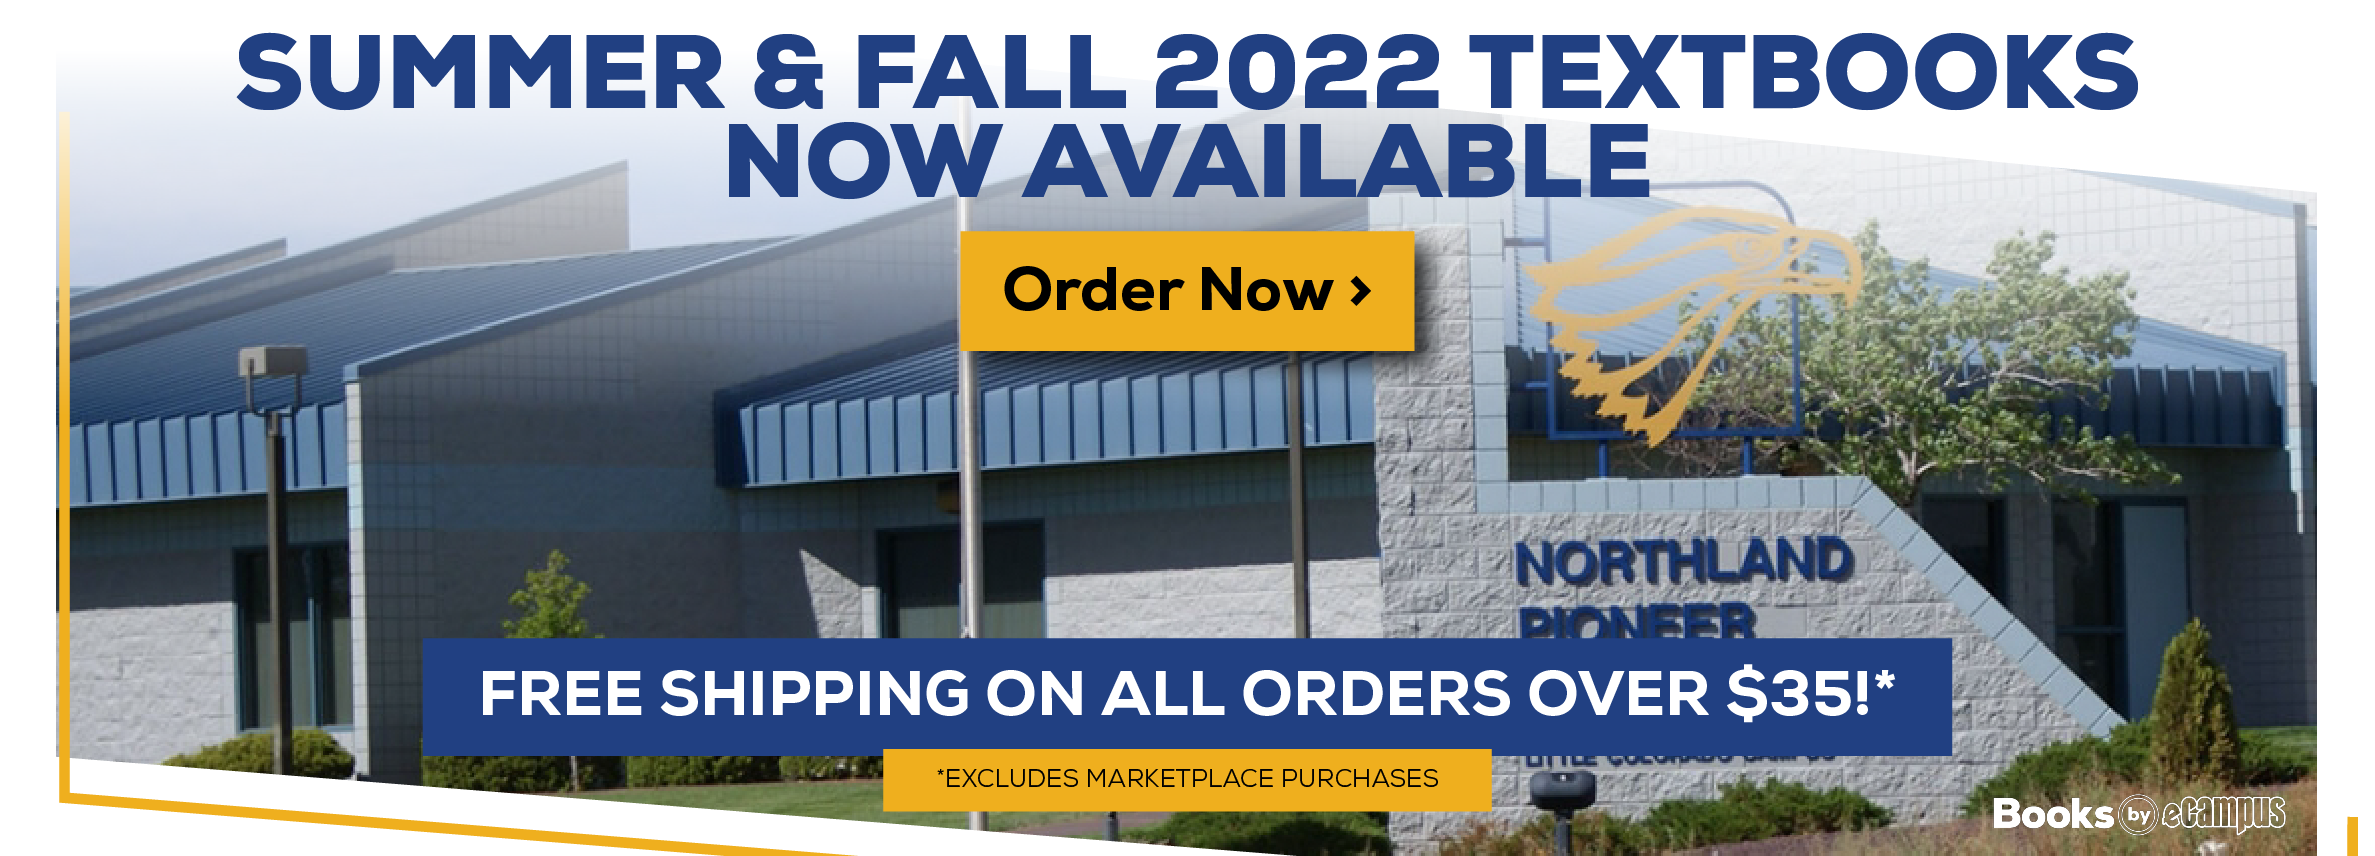 Summer and Fall 2022 Textbooks Now available. Order now. Freeshipping on all orders over $35! *excludes marketplace purchases